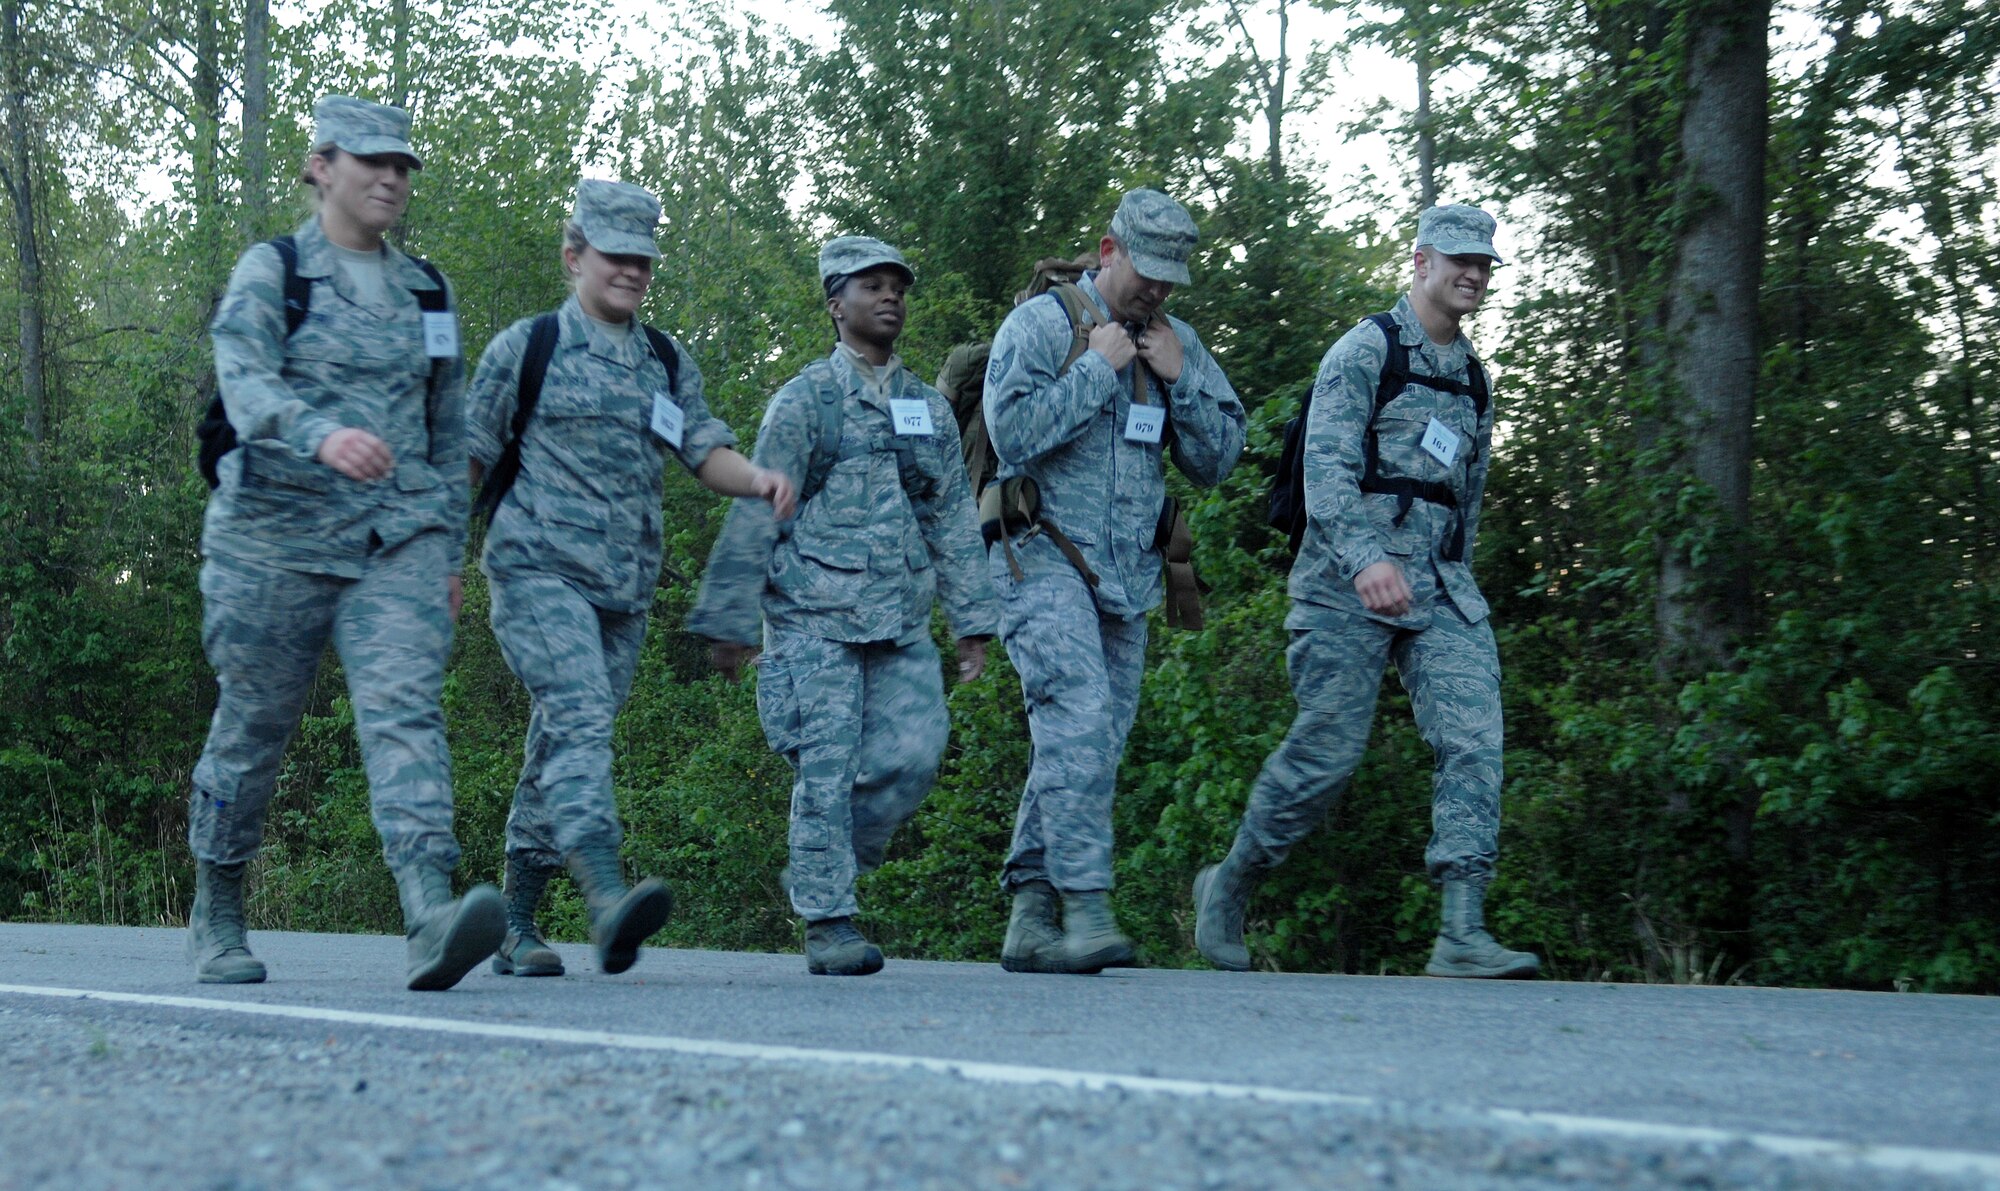 Members from the 633rd Medical Group stick together during the 16.6-mile Bataan Death March memorial walk at Chesapeake, Va., April 27, 2013. Most Airmen wore their uniform for the walk to better emulate the experience endured by veterans before them. (U.S. Air Force photo by Airman 1st Class Austin Harvill/Released)